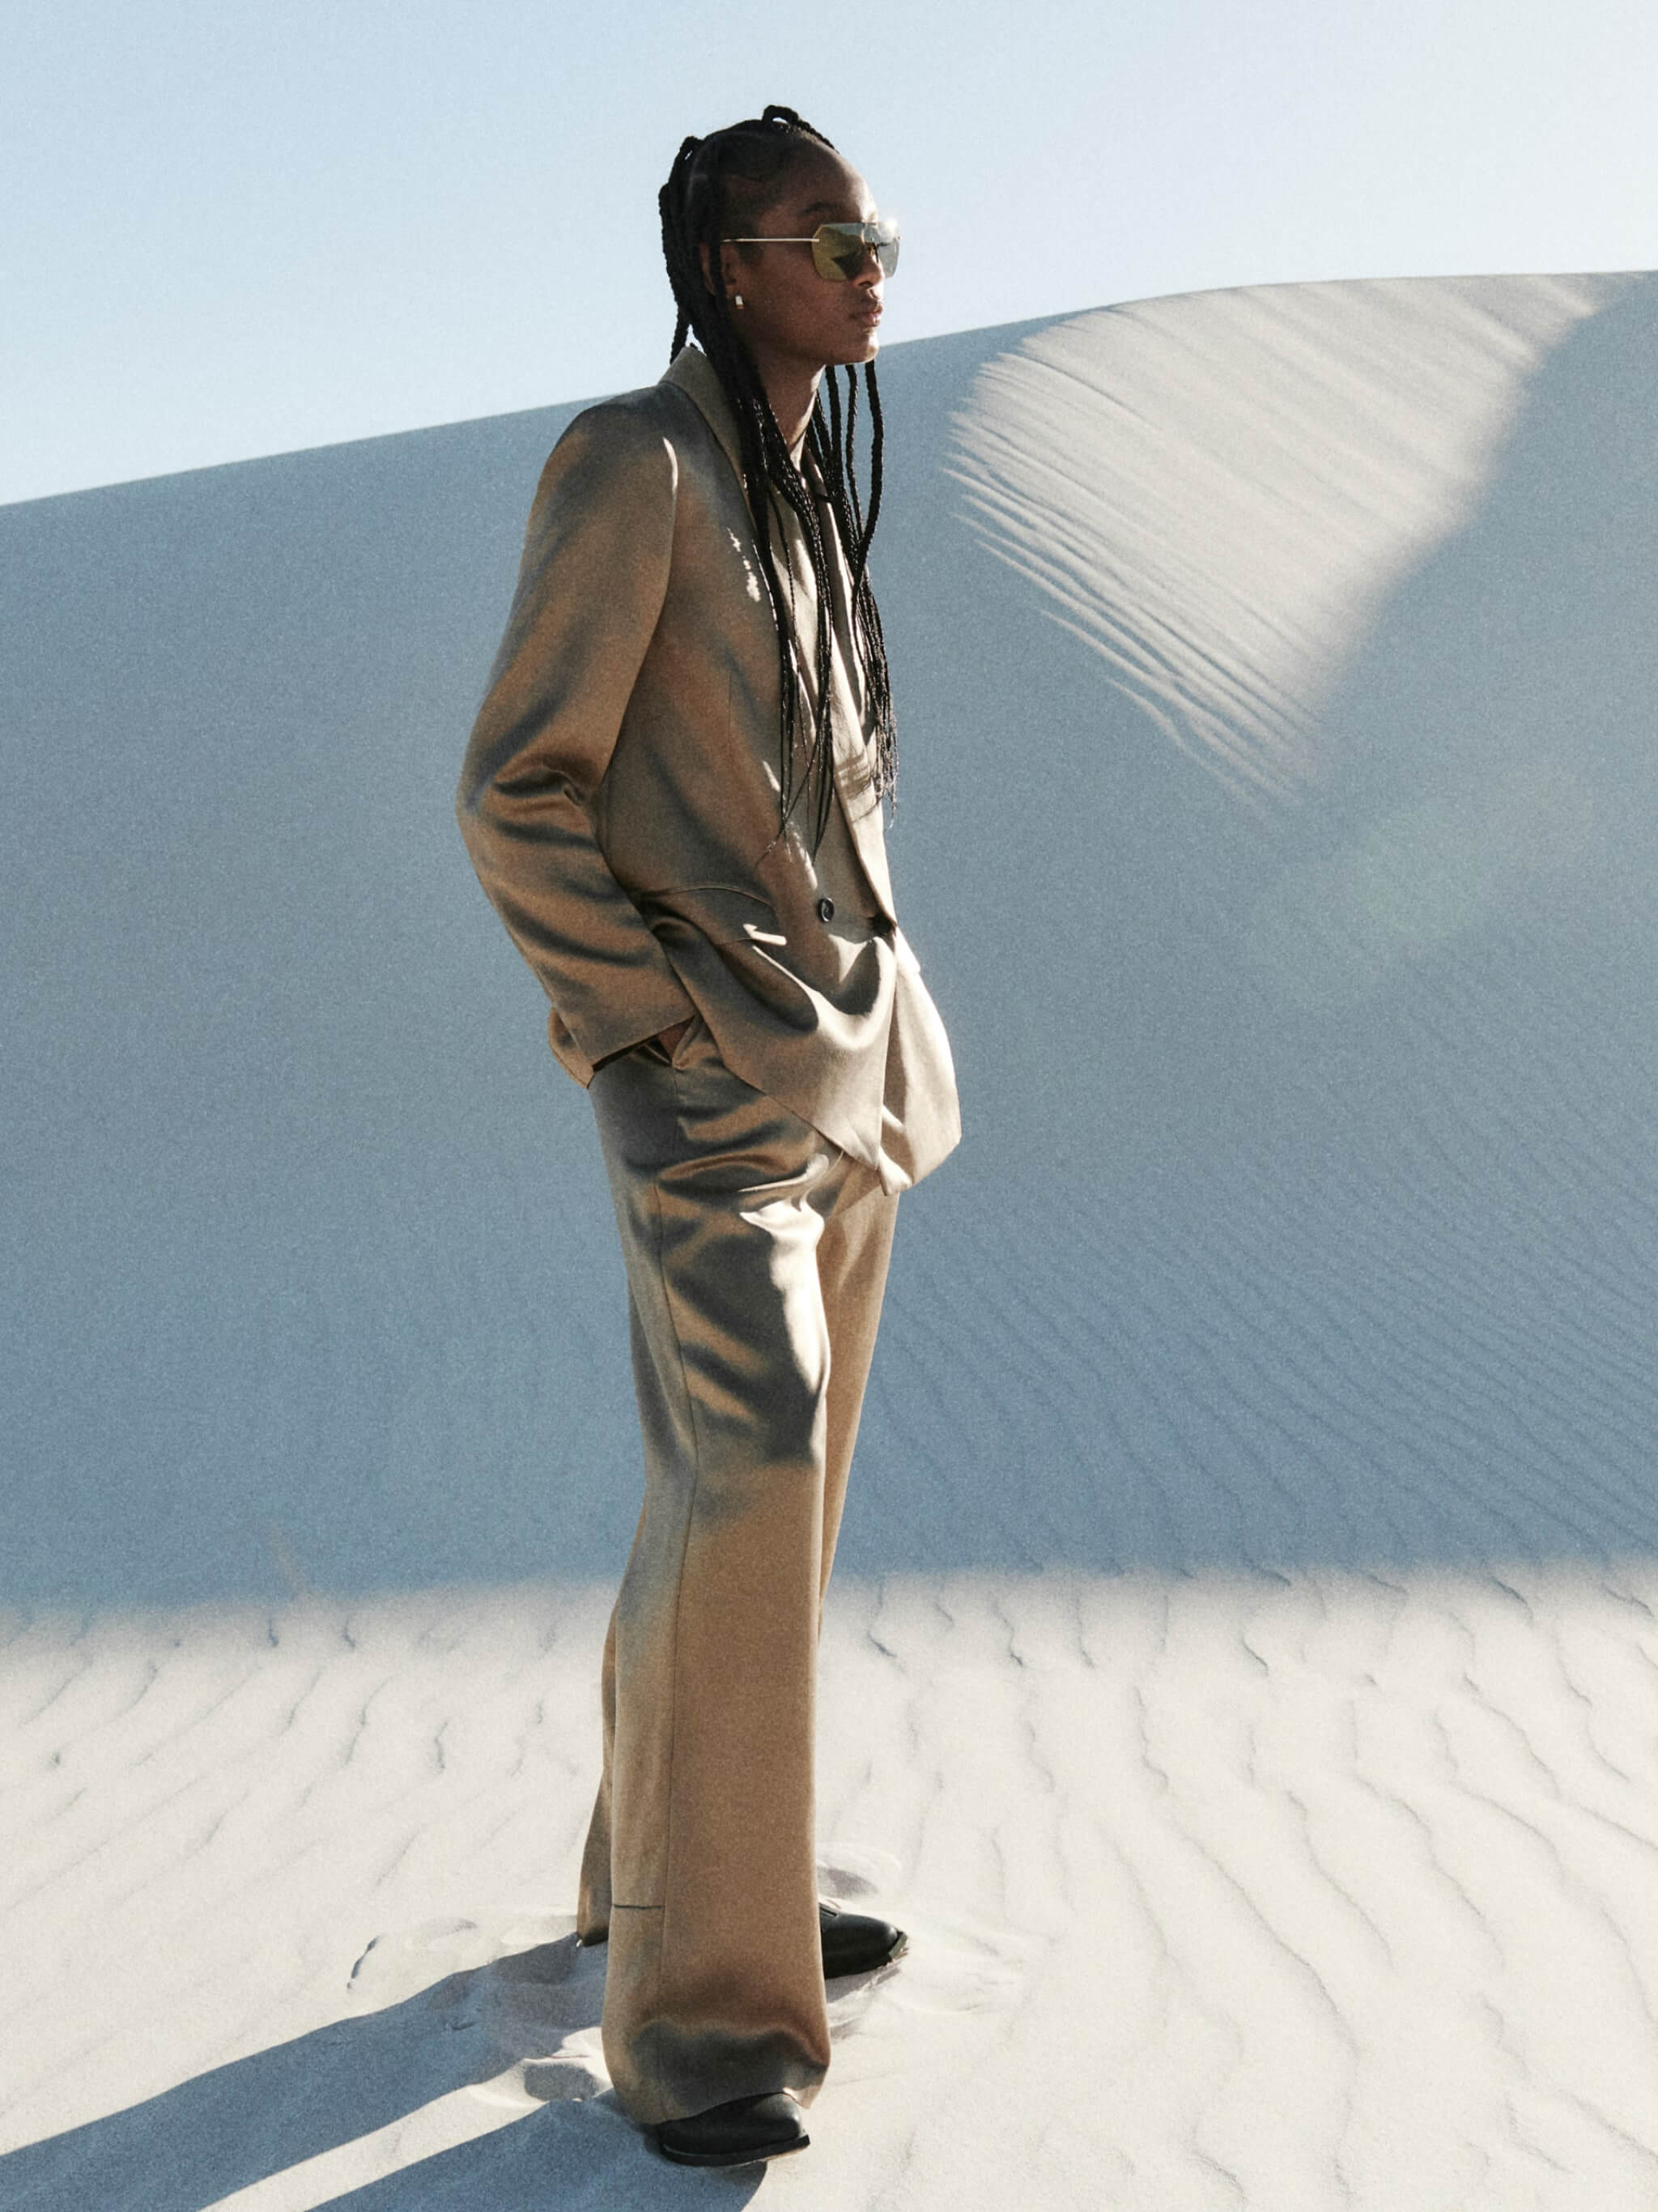 A woman standing in the desert wearing a light brown tailored suit and sunglasses.